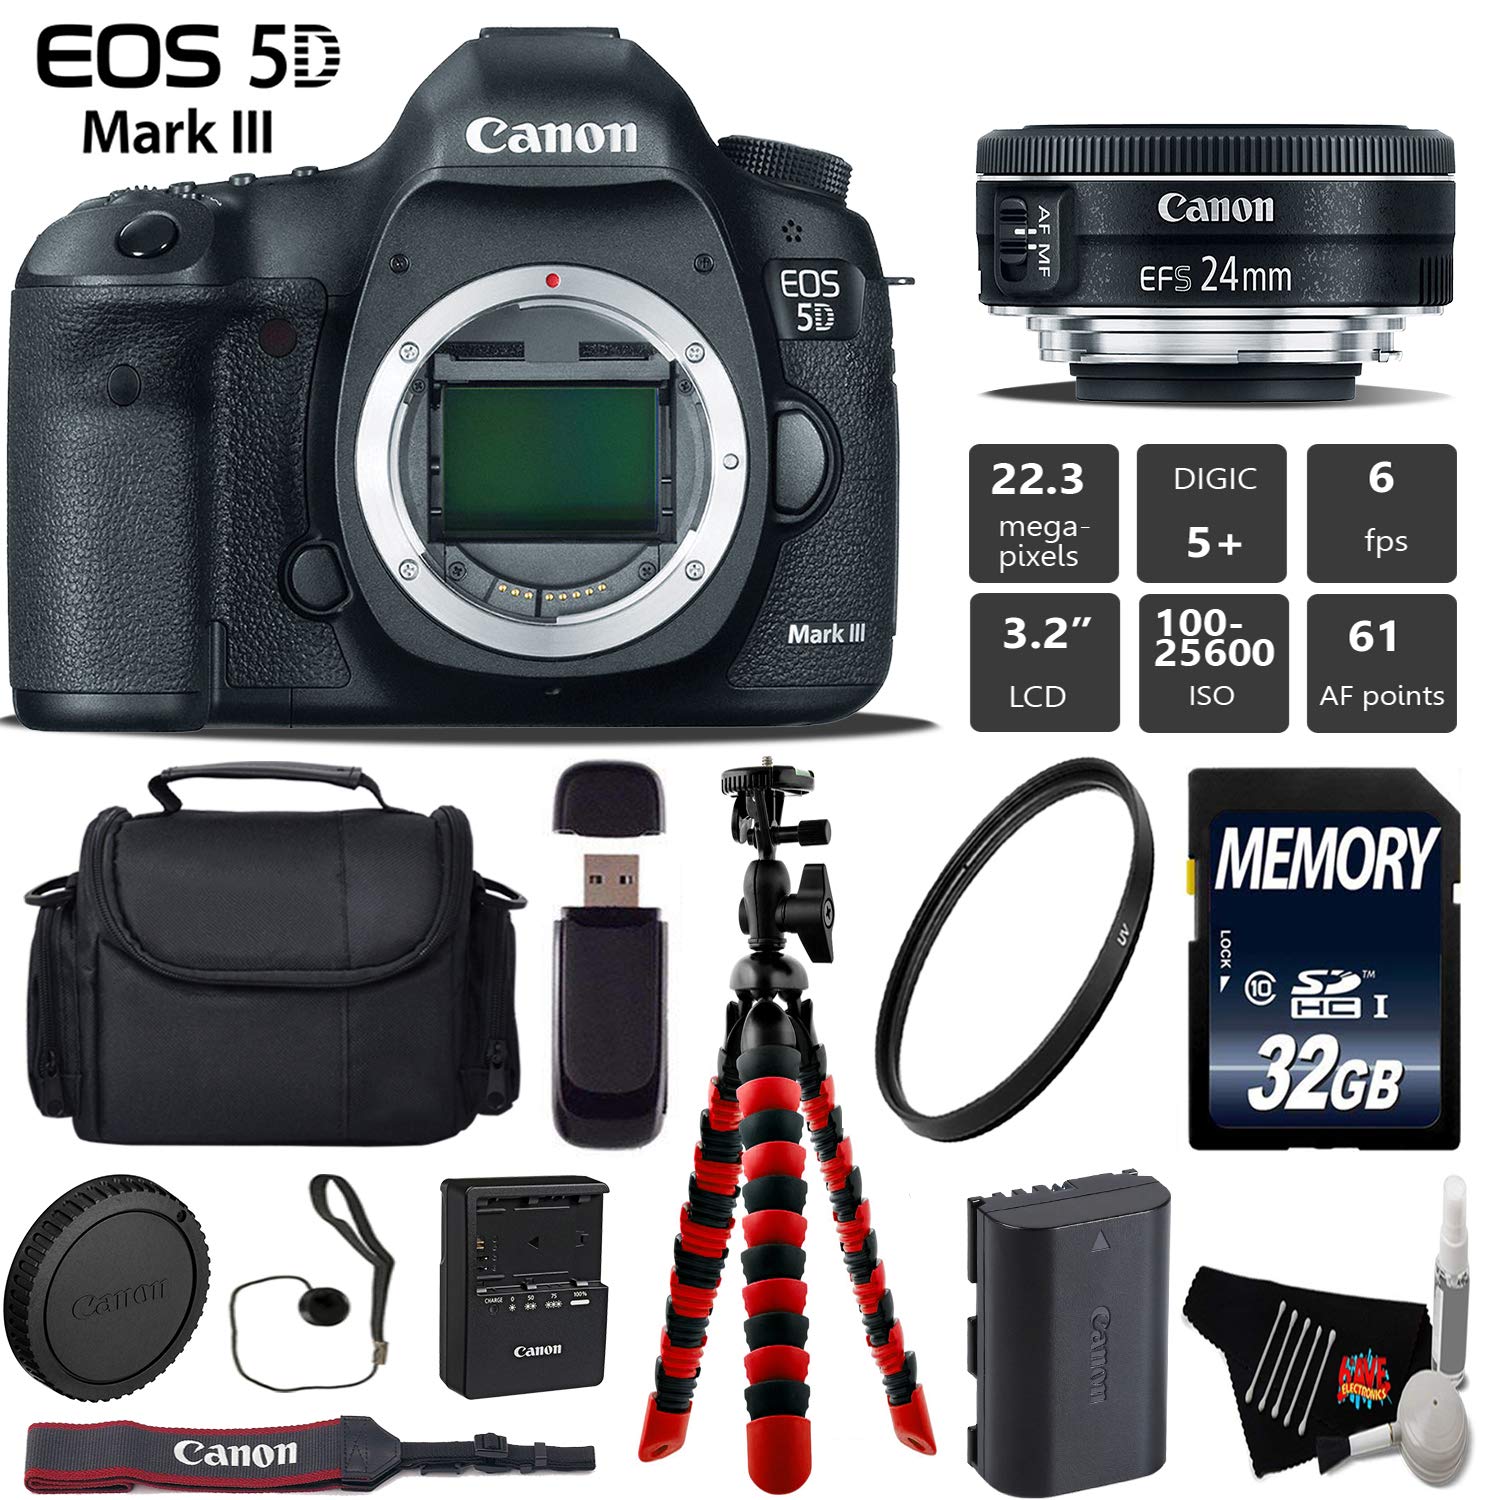 Canon EOS 5D Mark III DSLR Camera with 24mm f/2.8 STM Lens + Wireless Remote + UV Protection Filter + Case + Wrist Strap Starter Bundle